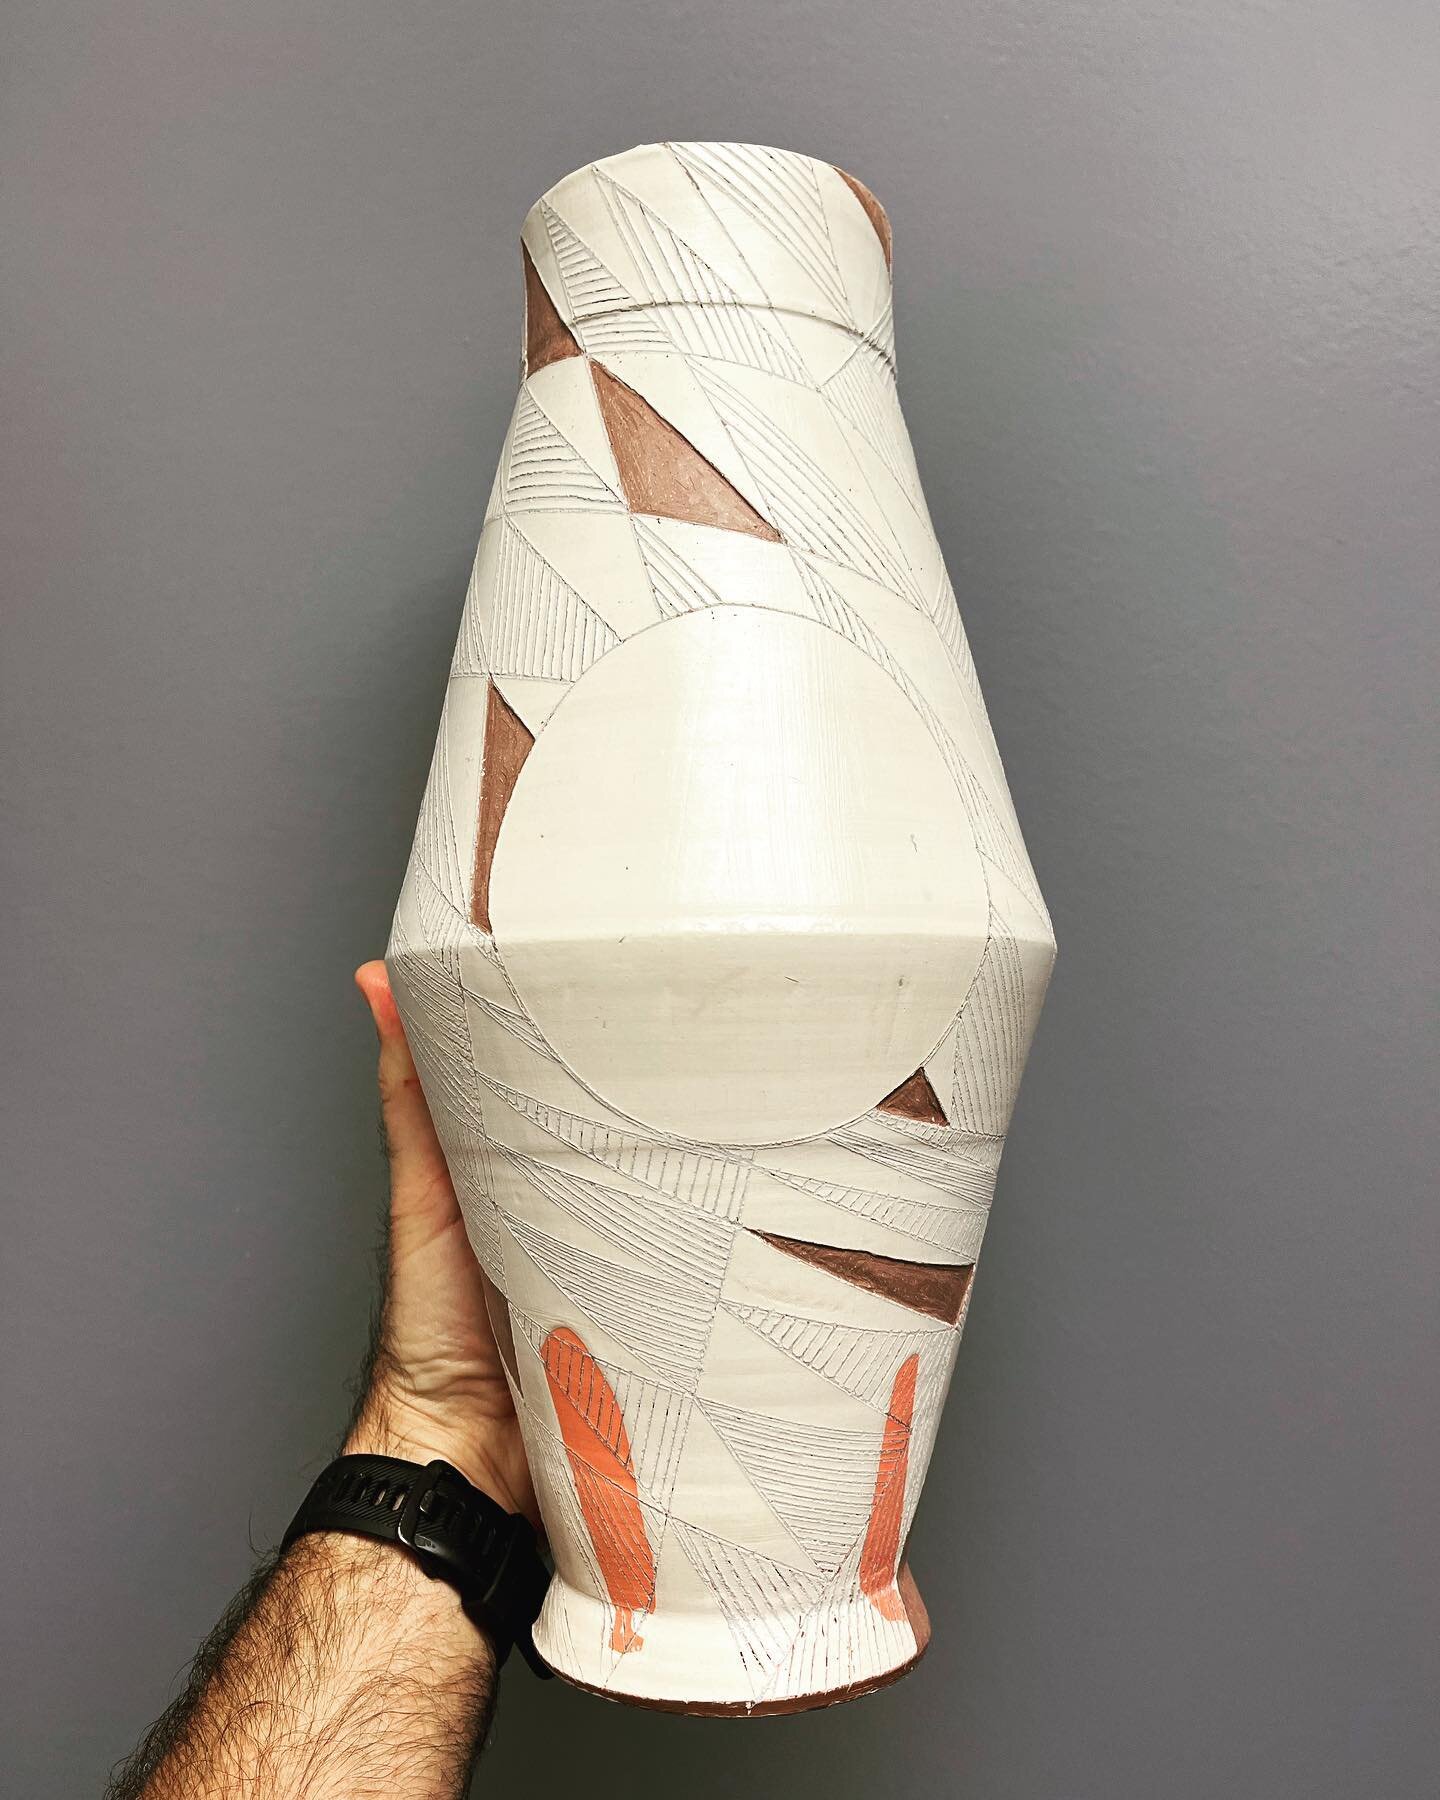 Here&rsquo;s another of the drawn and carved vases. Happy Friday, y&rsquo;all!
#ceramics #pottery #drawing #mishima #sgraffito #inlay #blueandwhite #flameorange #howiamaco